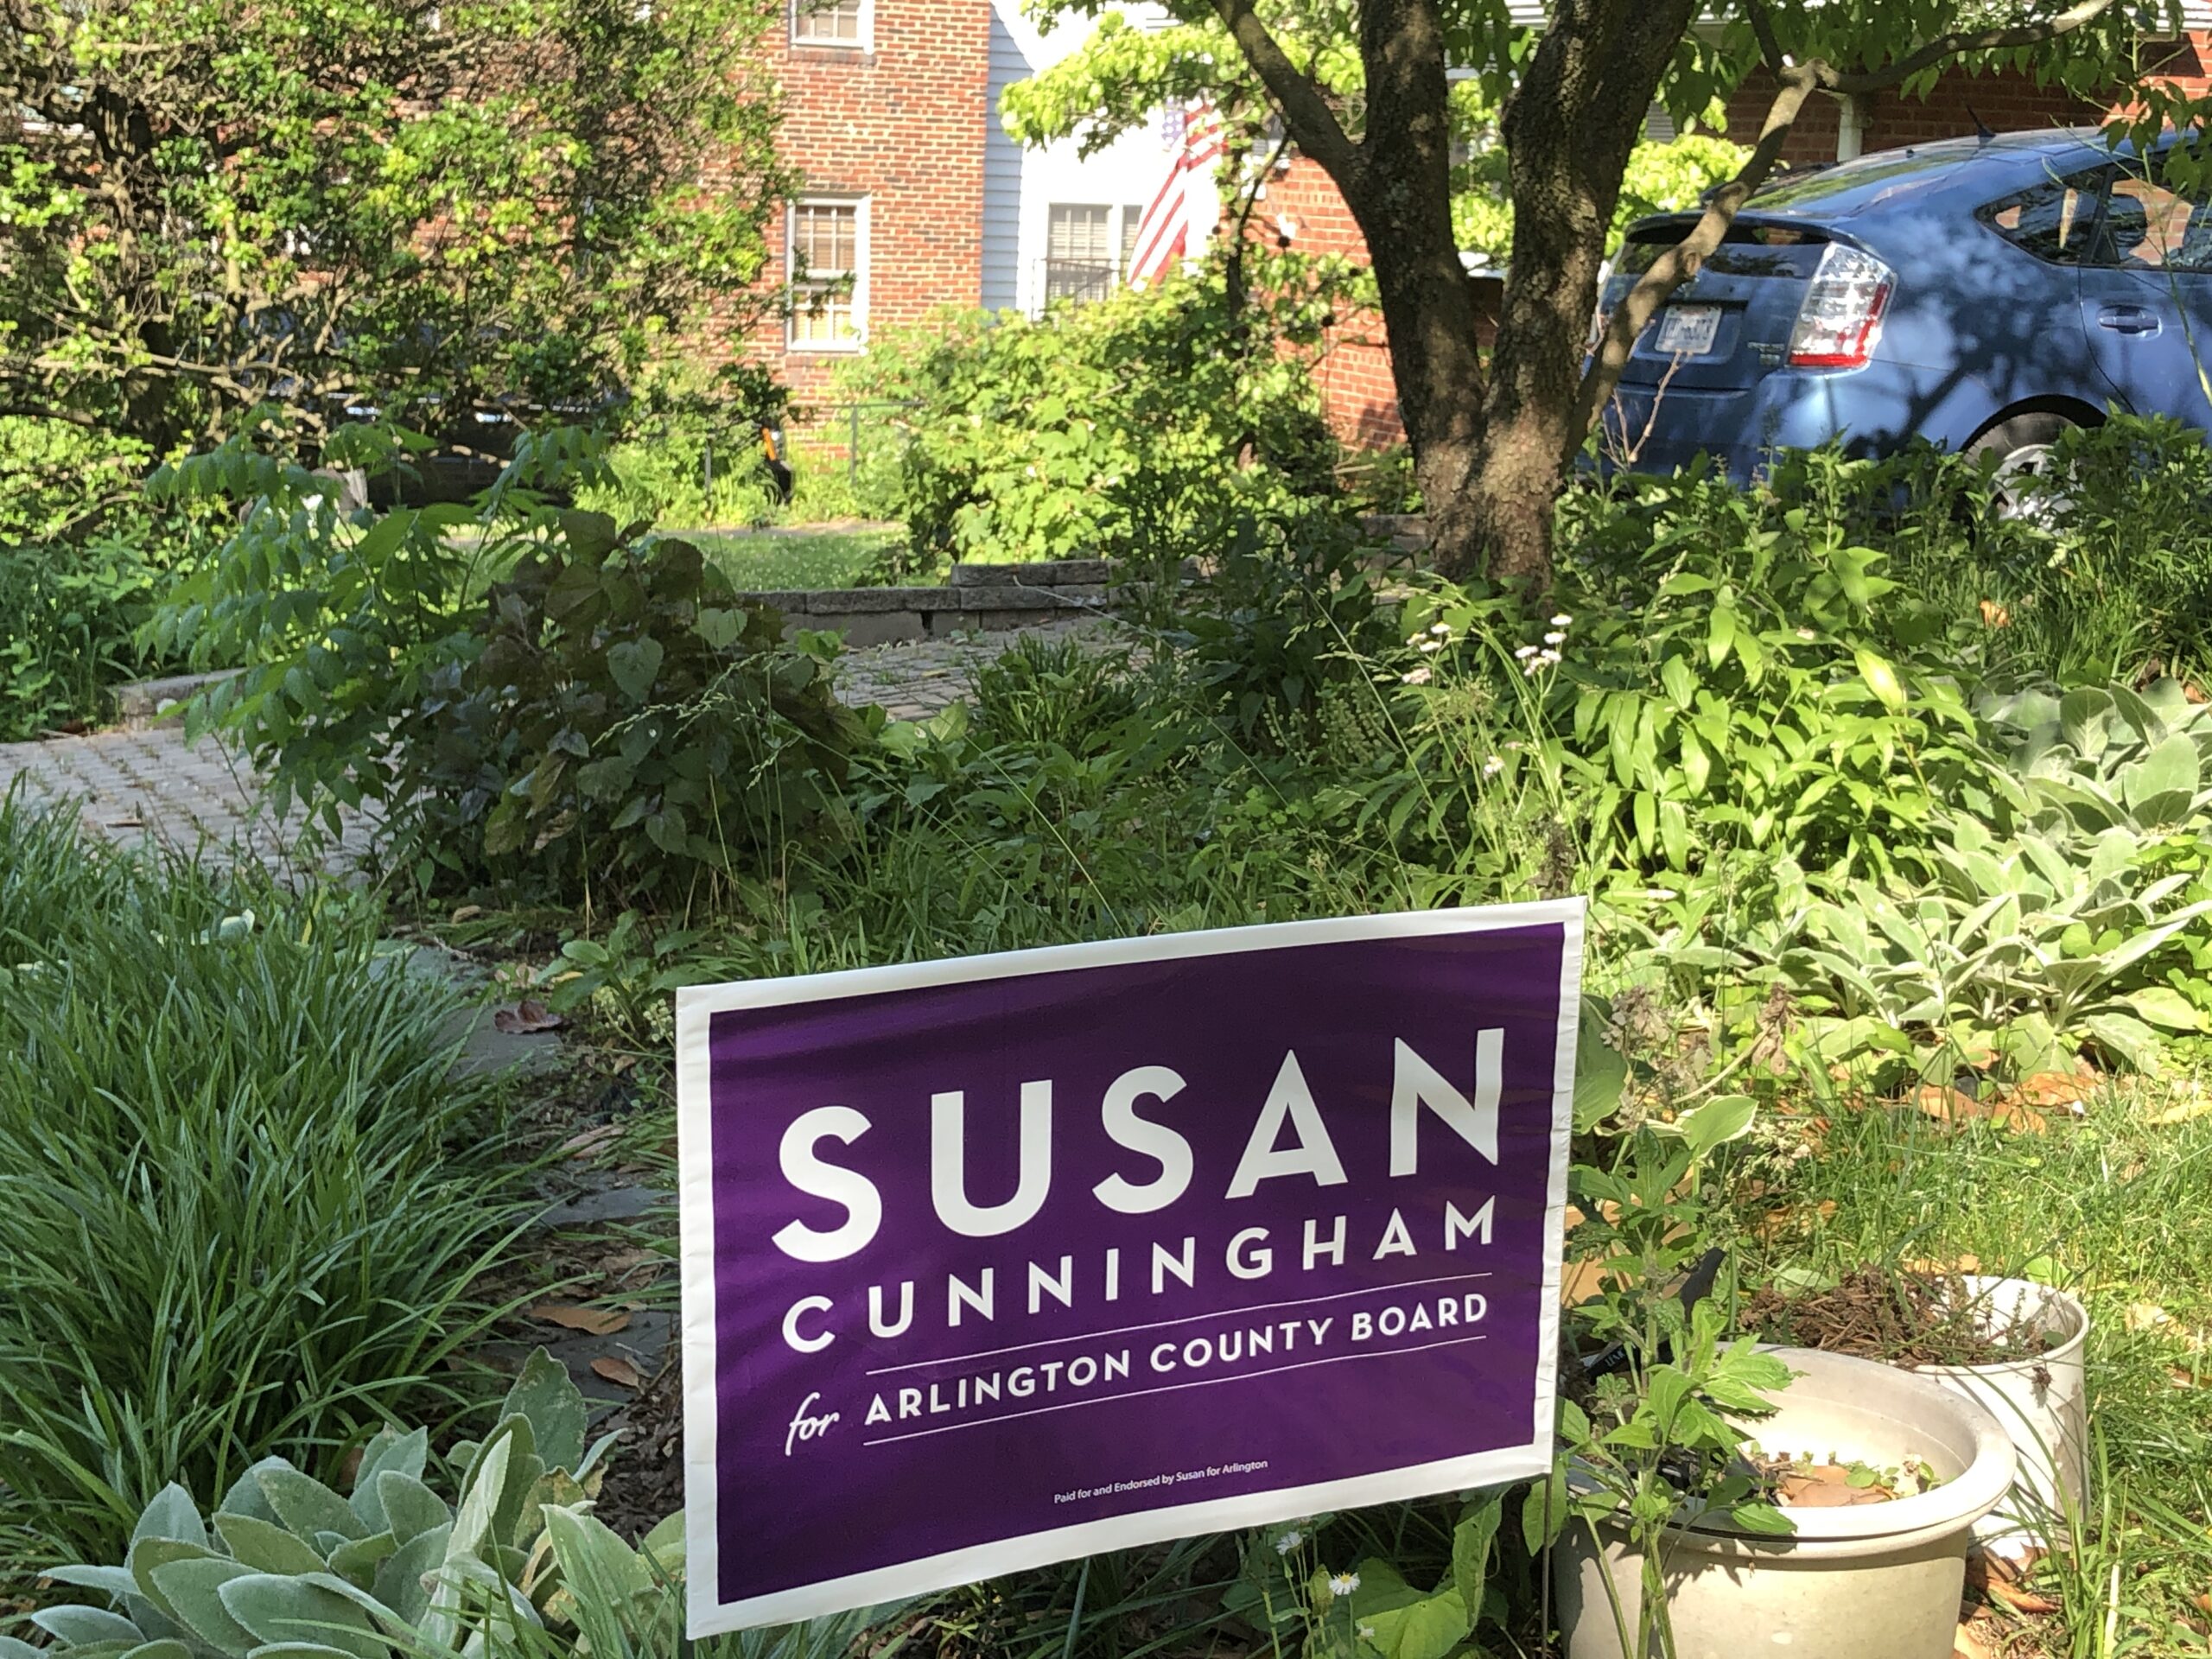 A yard sign for Susan Cunningham for Arlington County Commission.